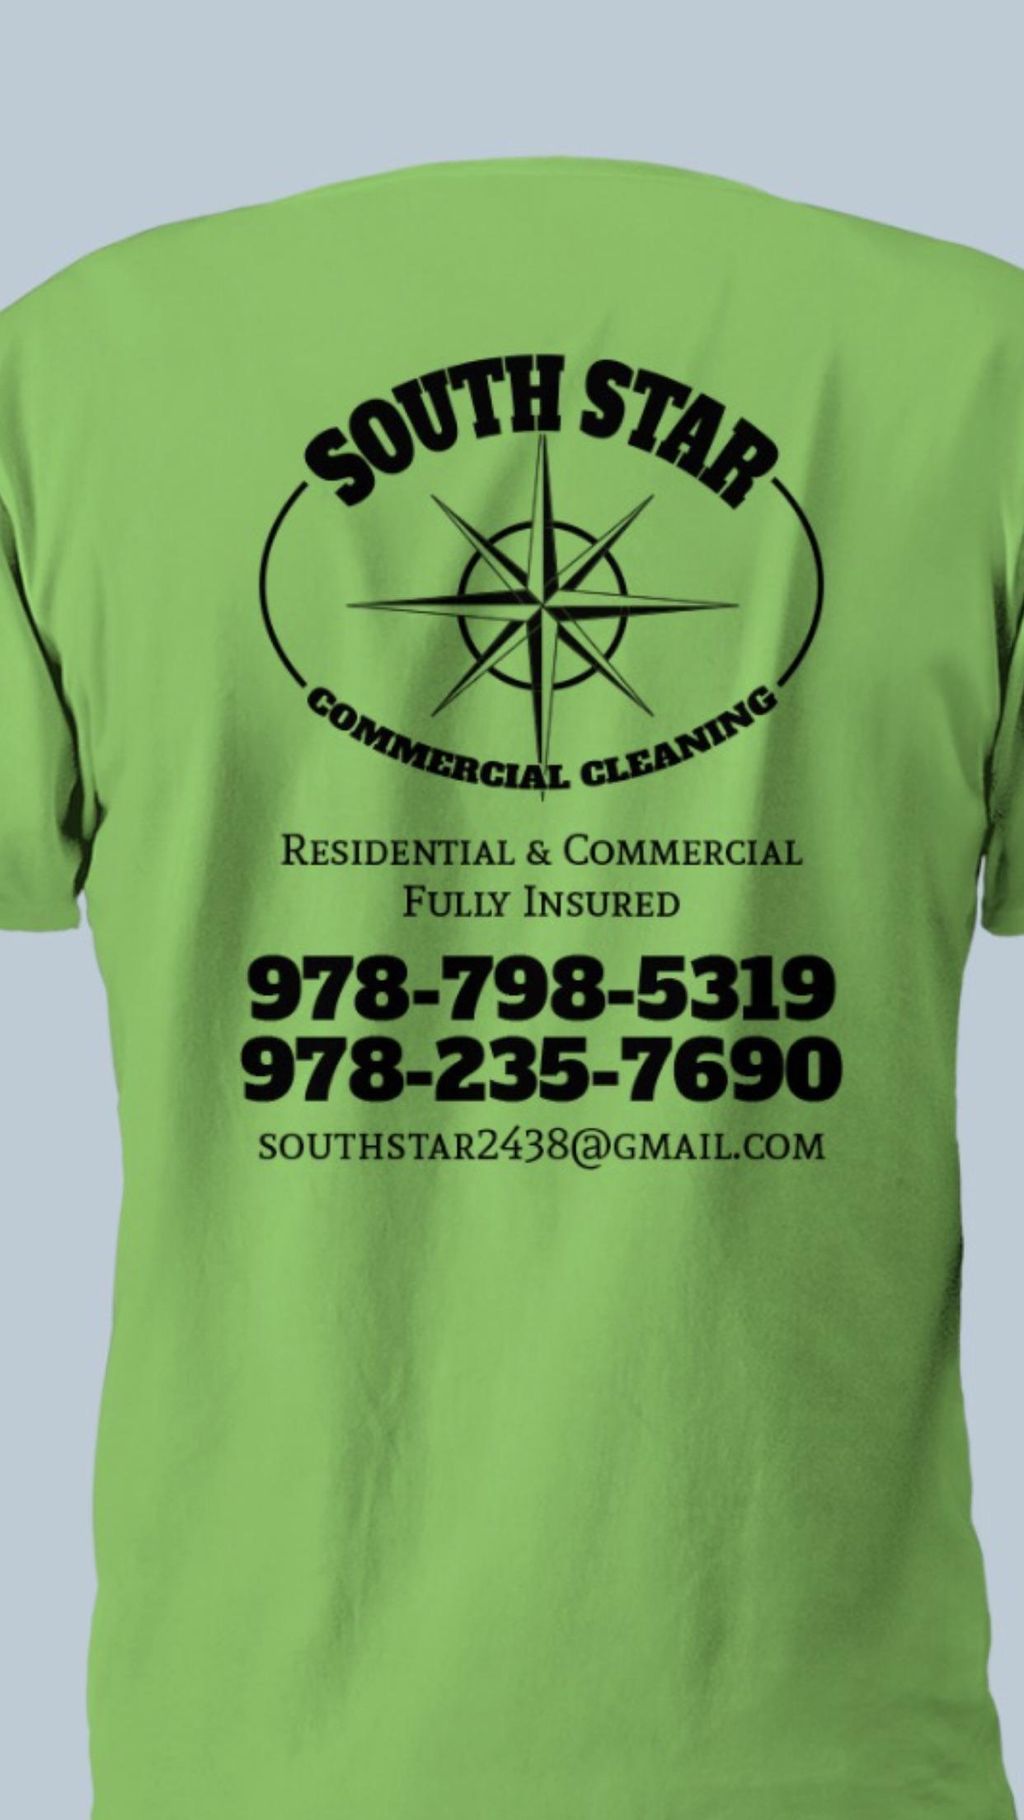 SouthStar Commerical Cleaning